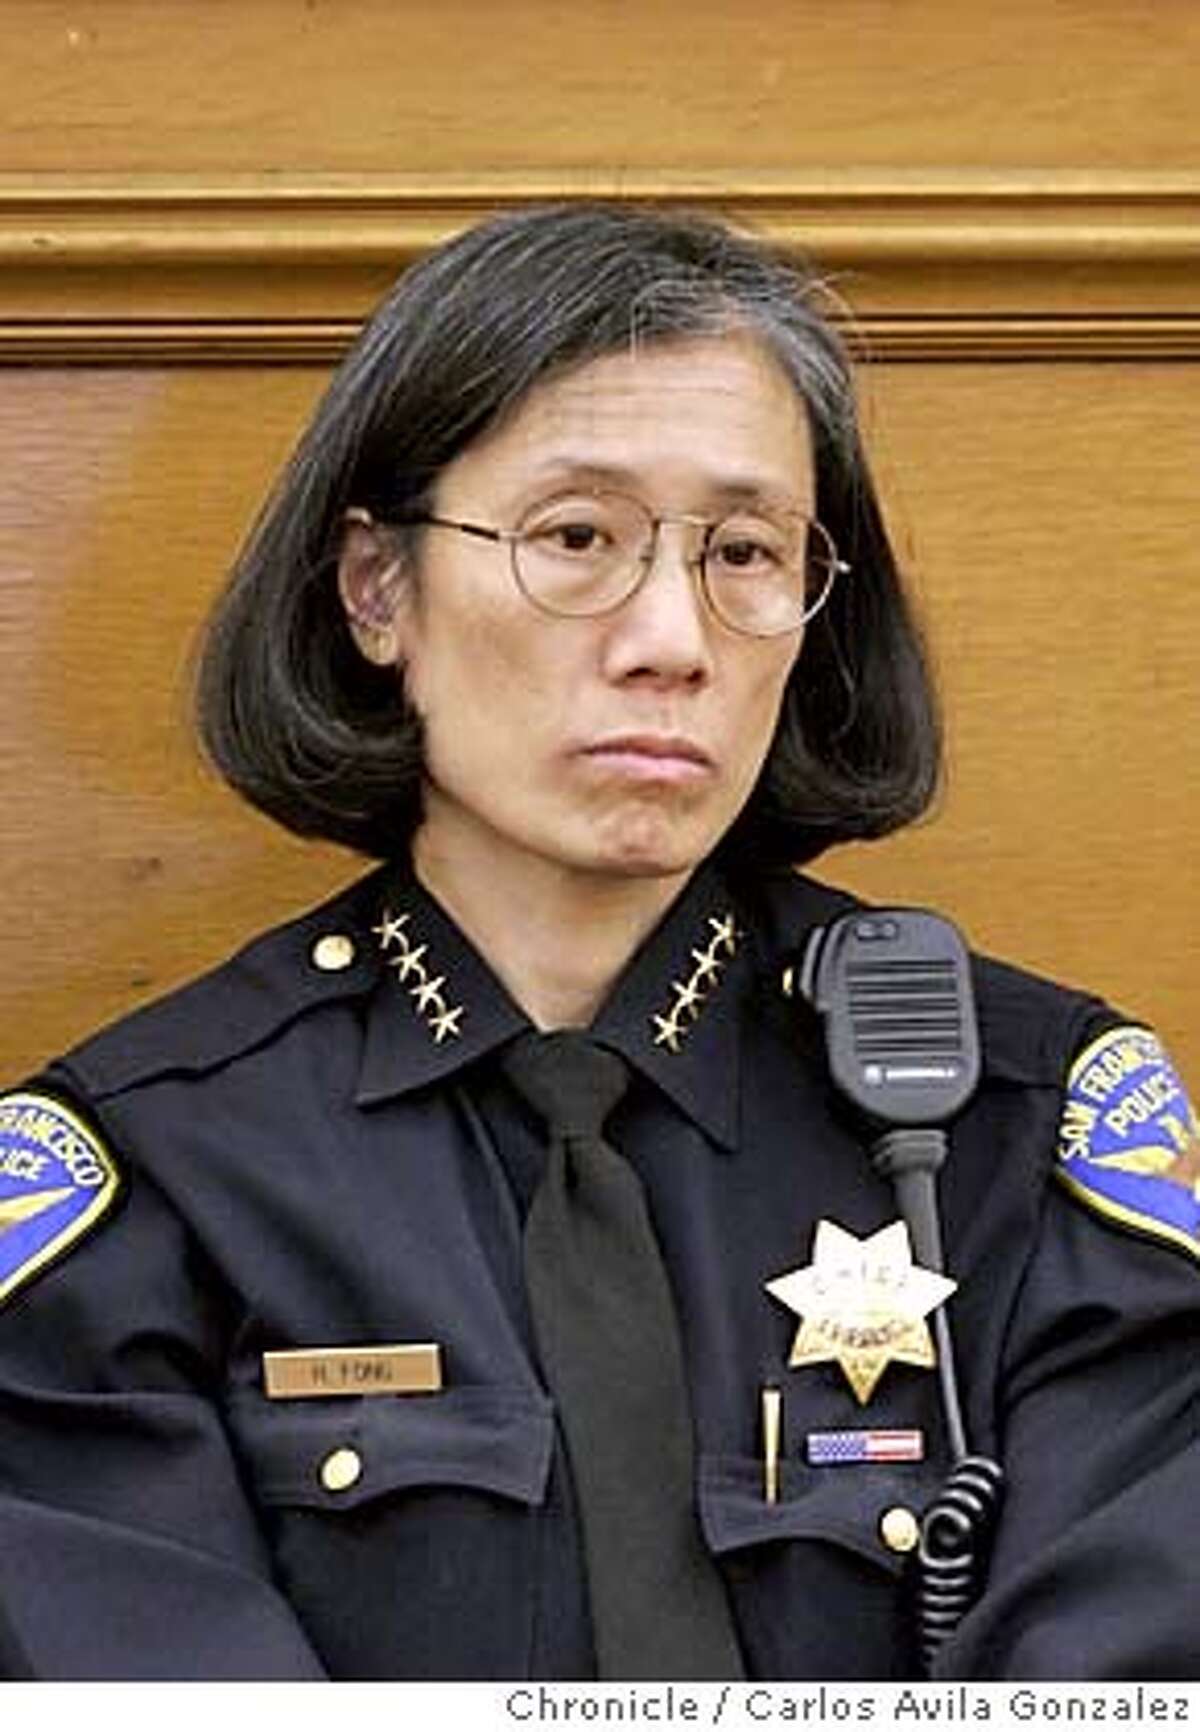 SFPD011_CAG.JPG San Francisco Police Department Chief, Heather Fong. Photo taken on 10/06/04, in San Francisco, Ca. Photo by Carlos Avila Gonzalez/The San Francisco Chronicle MANDATORY CREDIT FOR PHOTOG AND SF CHRONICLE/ -MAGS OUT